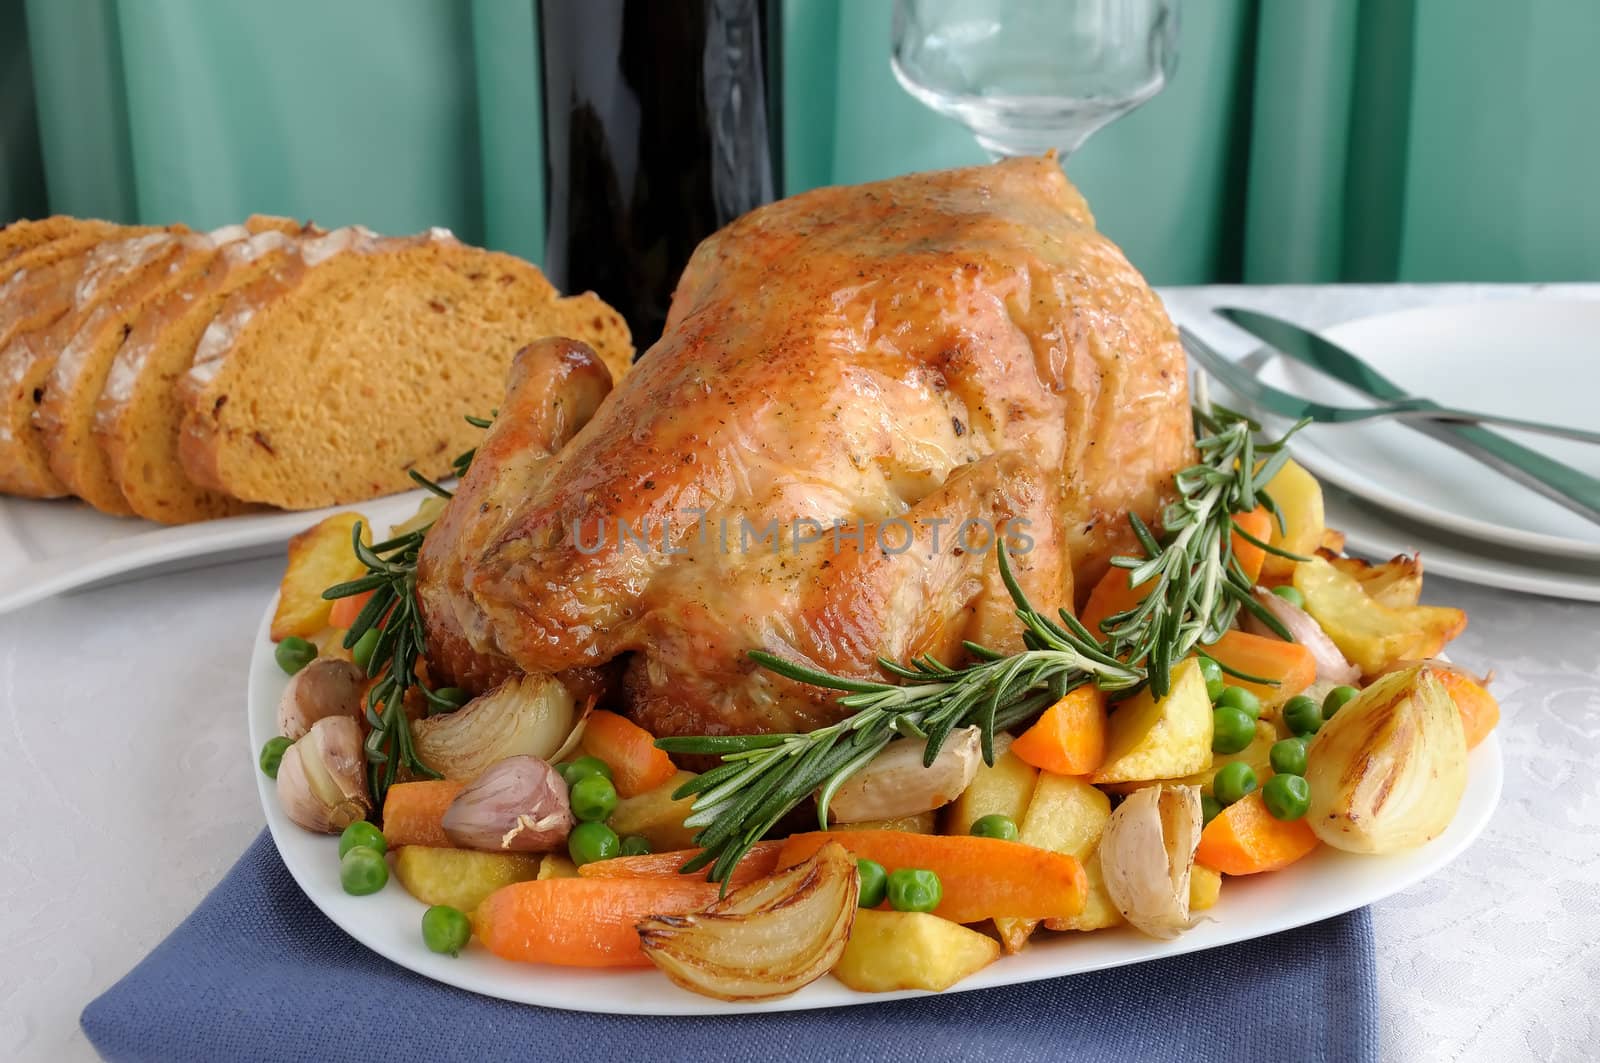 Baked chicken with vegetables and whole rosemary

